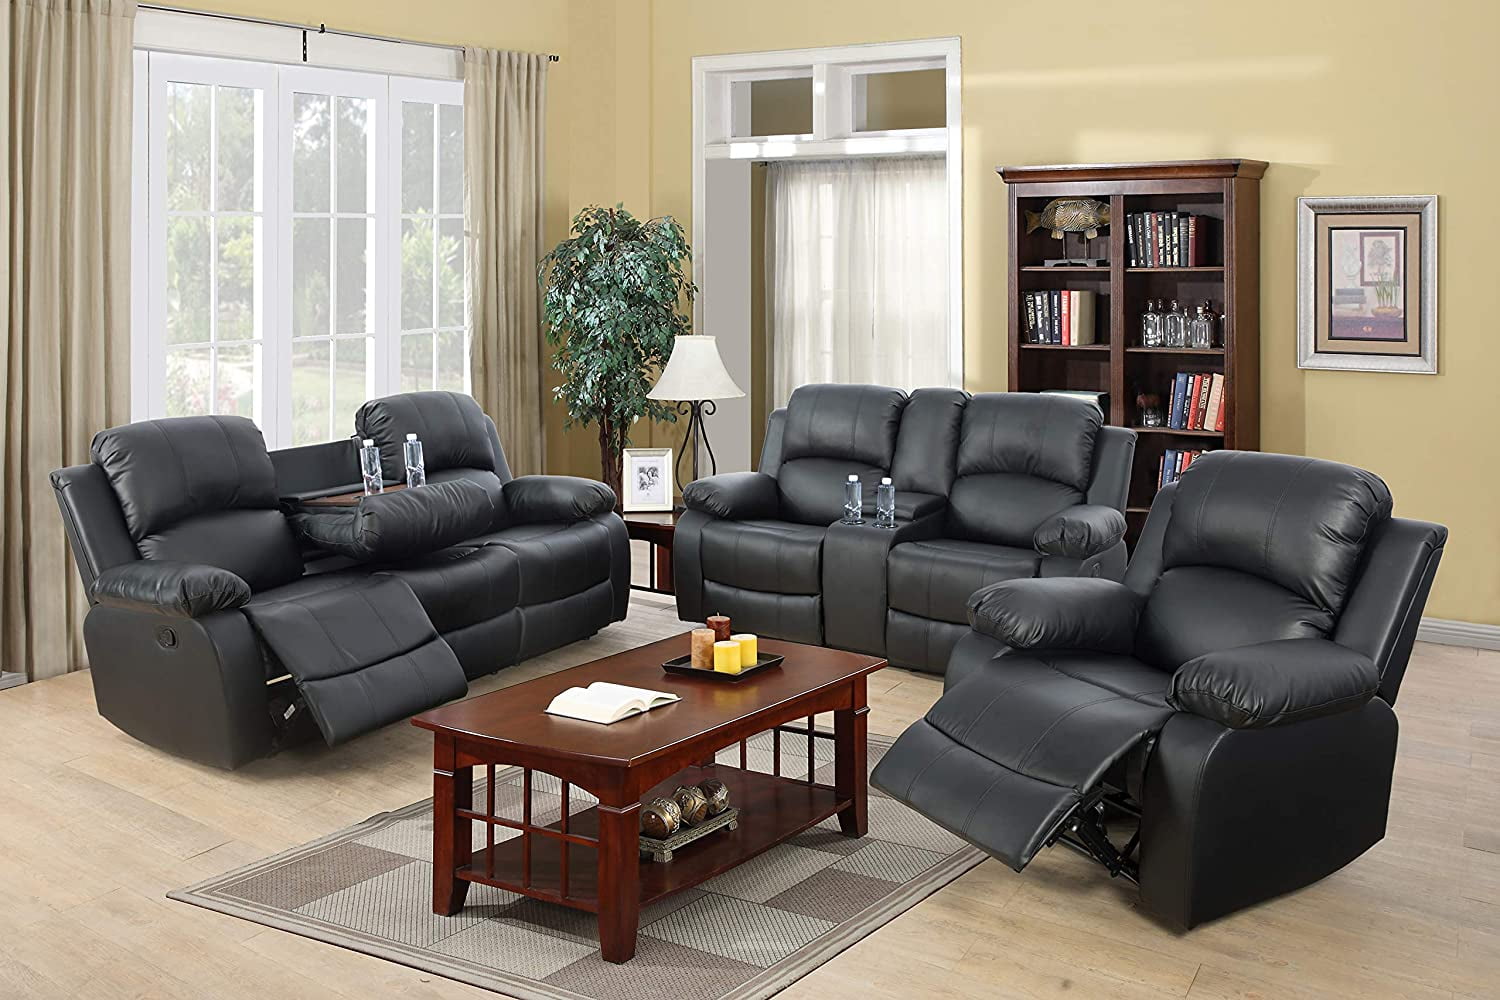 Couch Sofa Recliner With Cup Holder, Three Piece Reclining Living Room Set